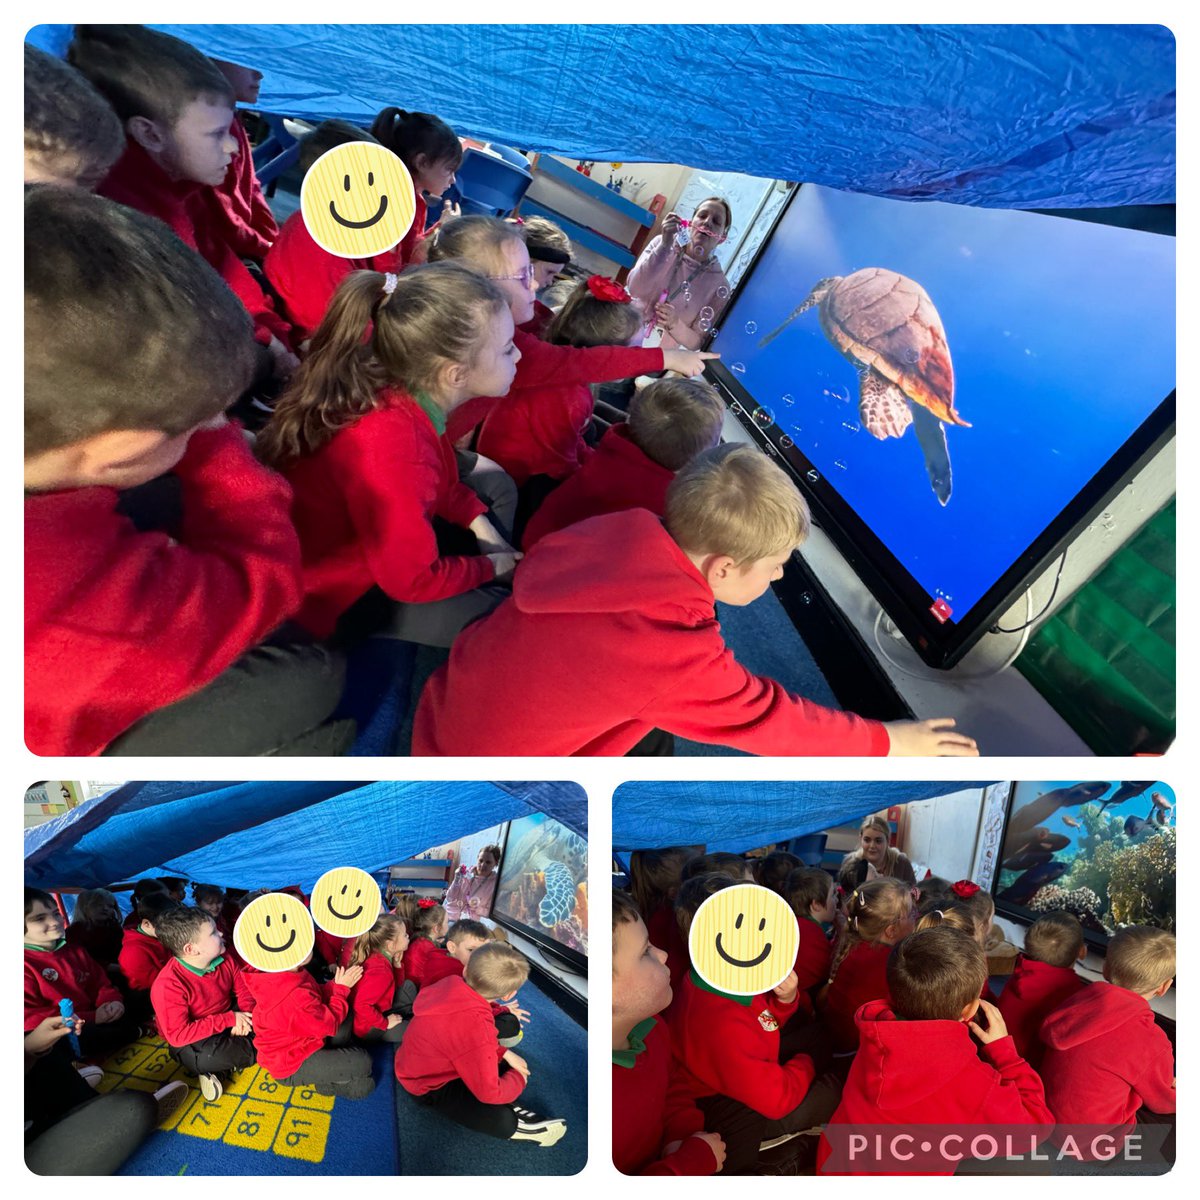 IA 3.1 Dosbarth Palm’s big question is ‘How can we look after God’s creatures?’ They enjoyed their virtual trip under the sea - splashes of water and lots of bubbles whilst watching a video 🌊🐠🐬🫧 @LlandaffDio @CSC_Wellbeing @CSC_SciTech